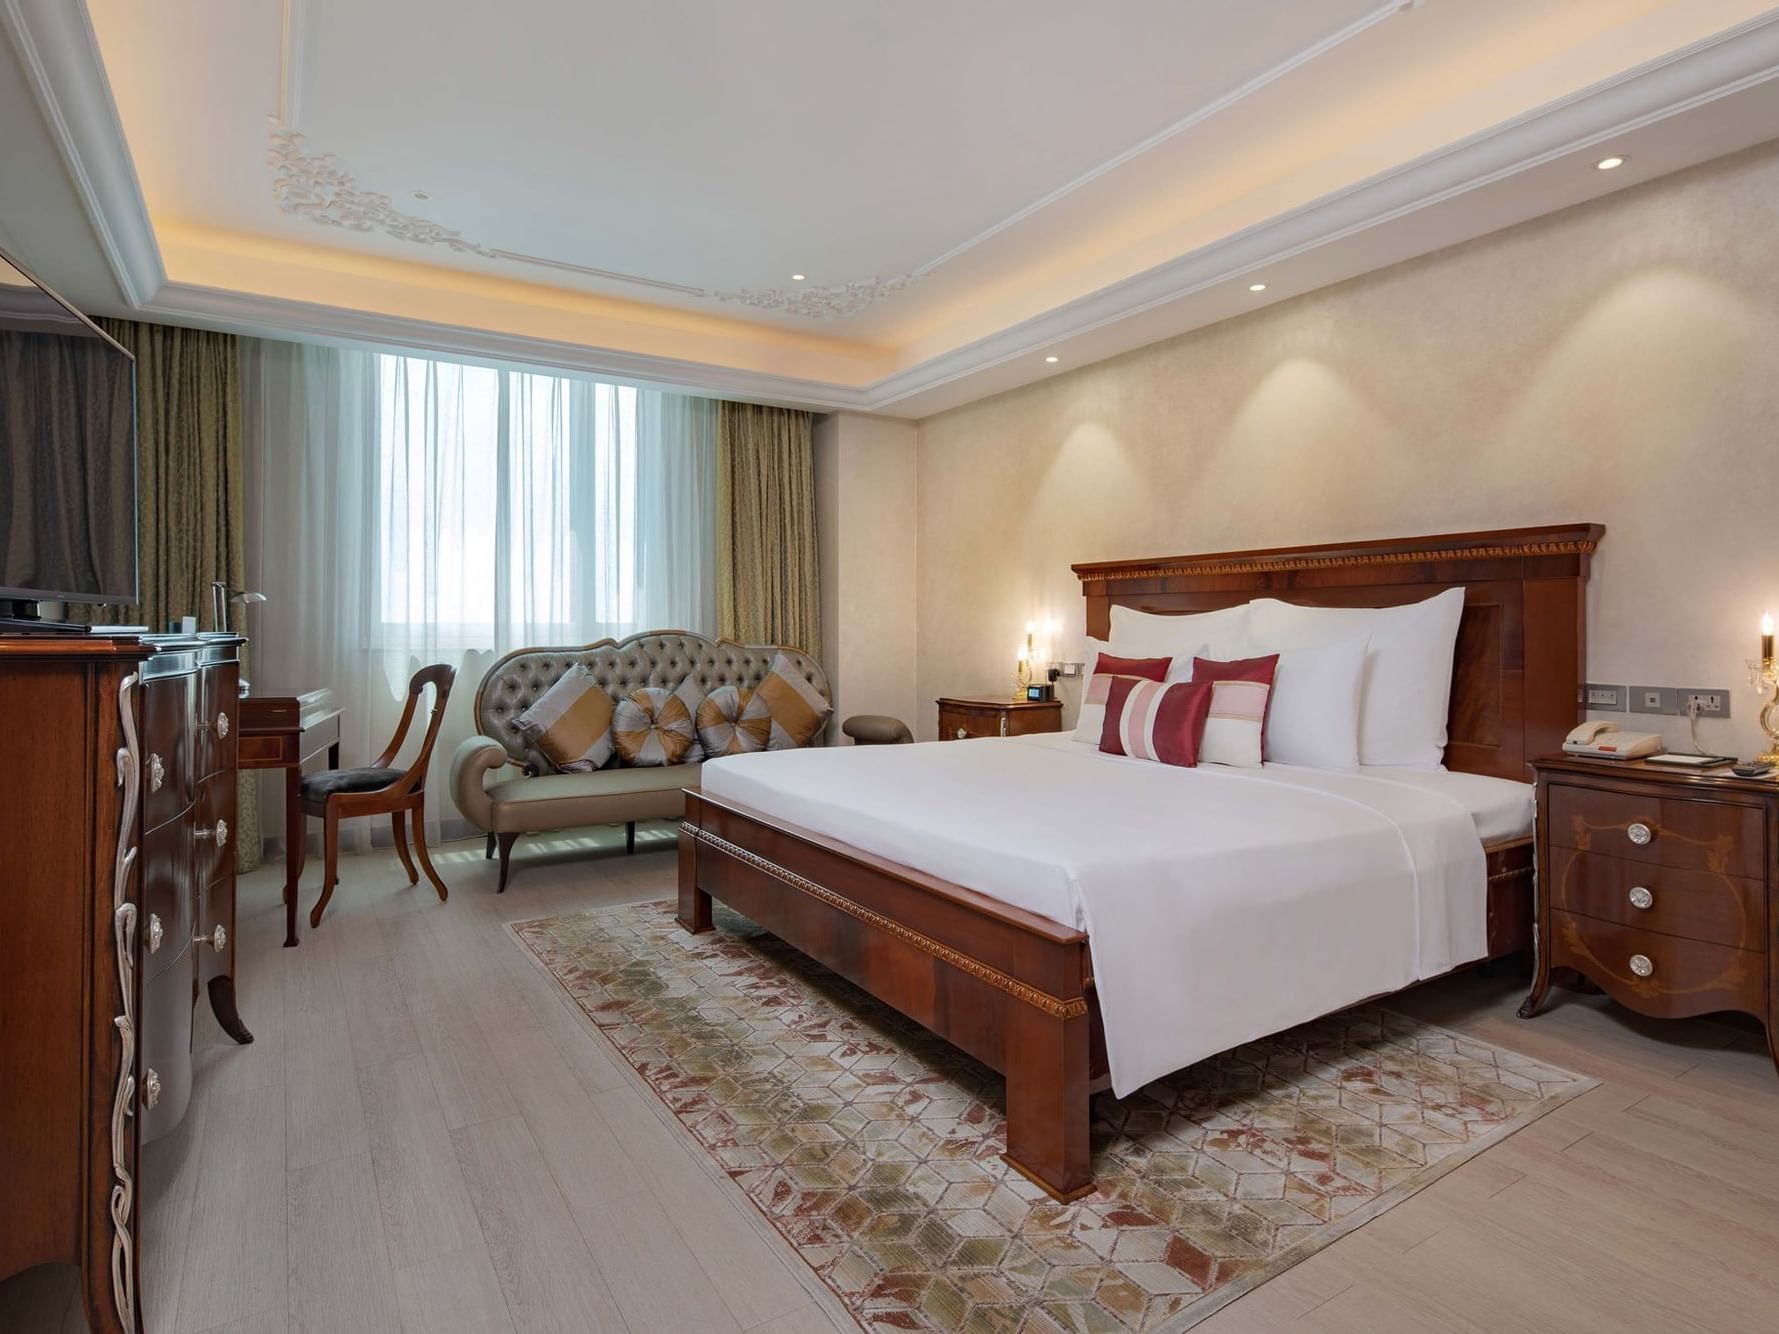 well lit hotel room with king bed and wood furniture